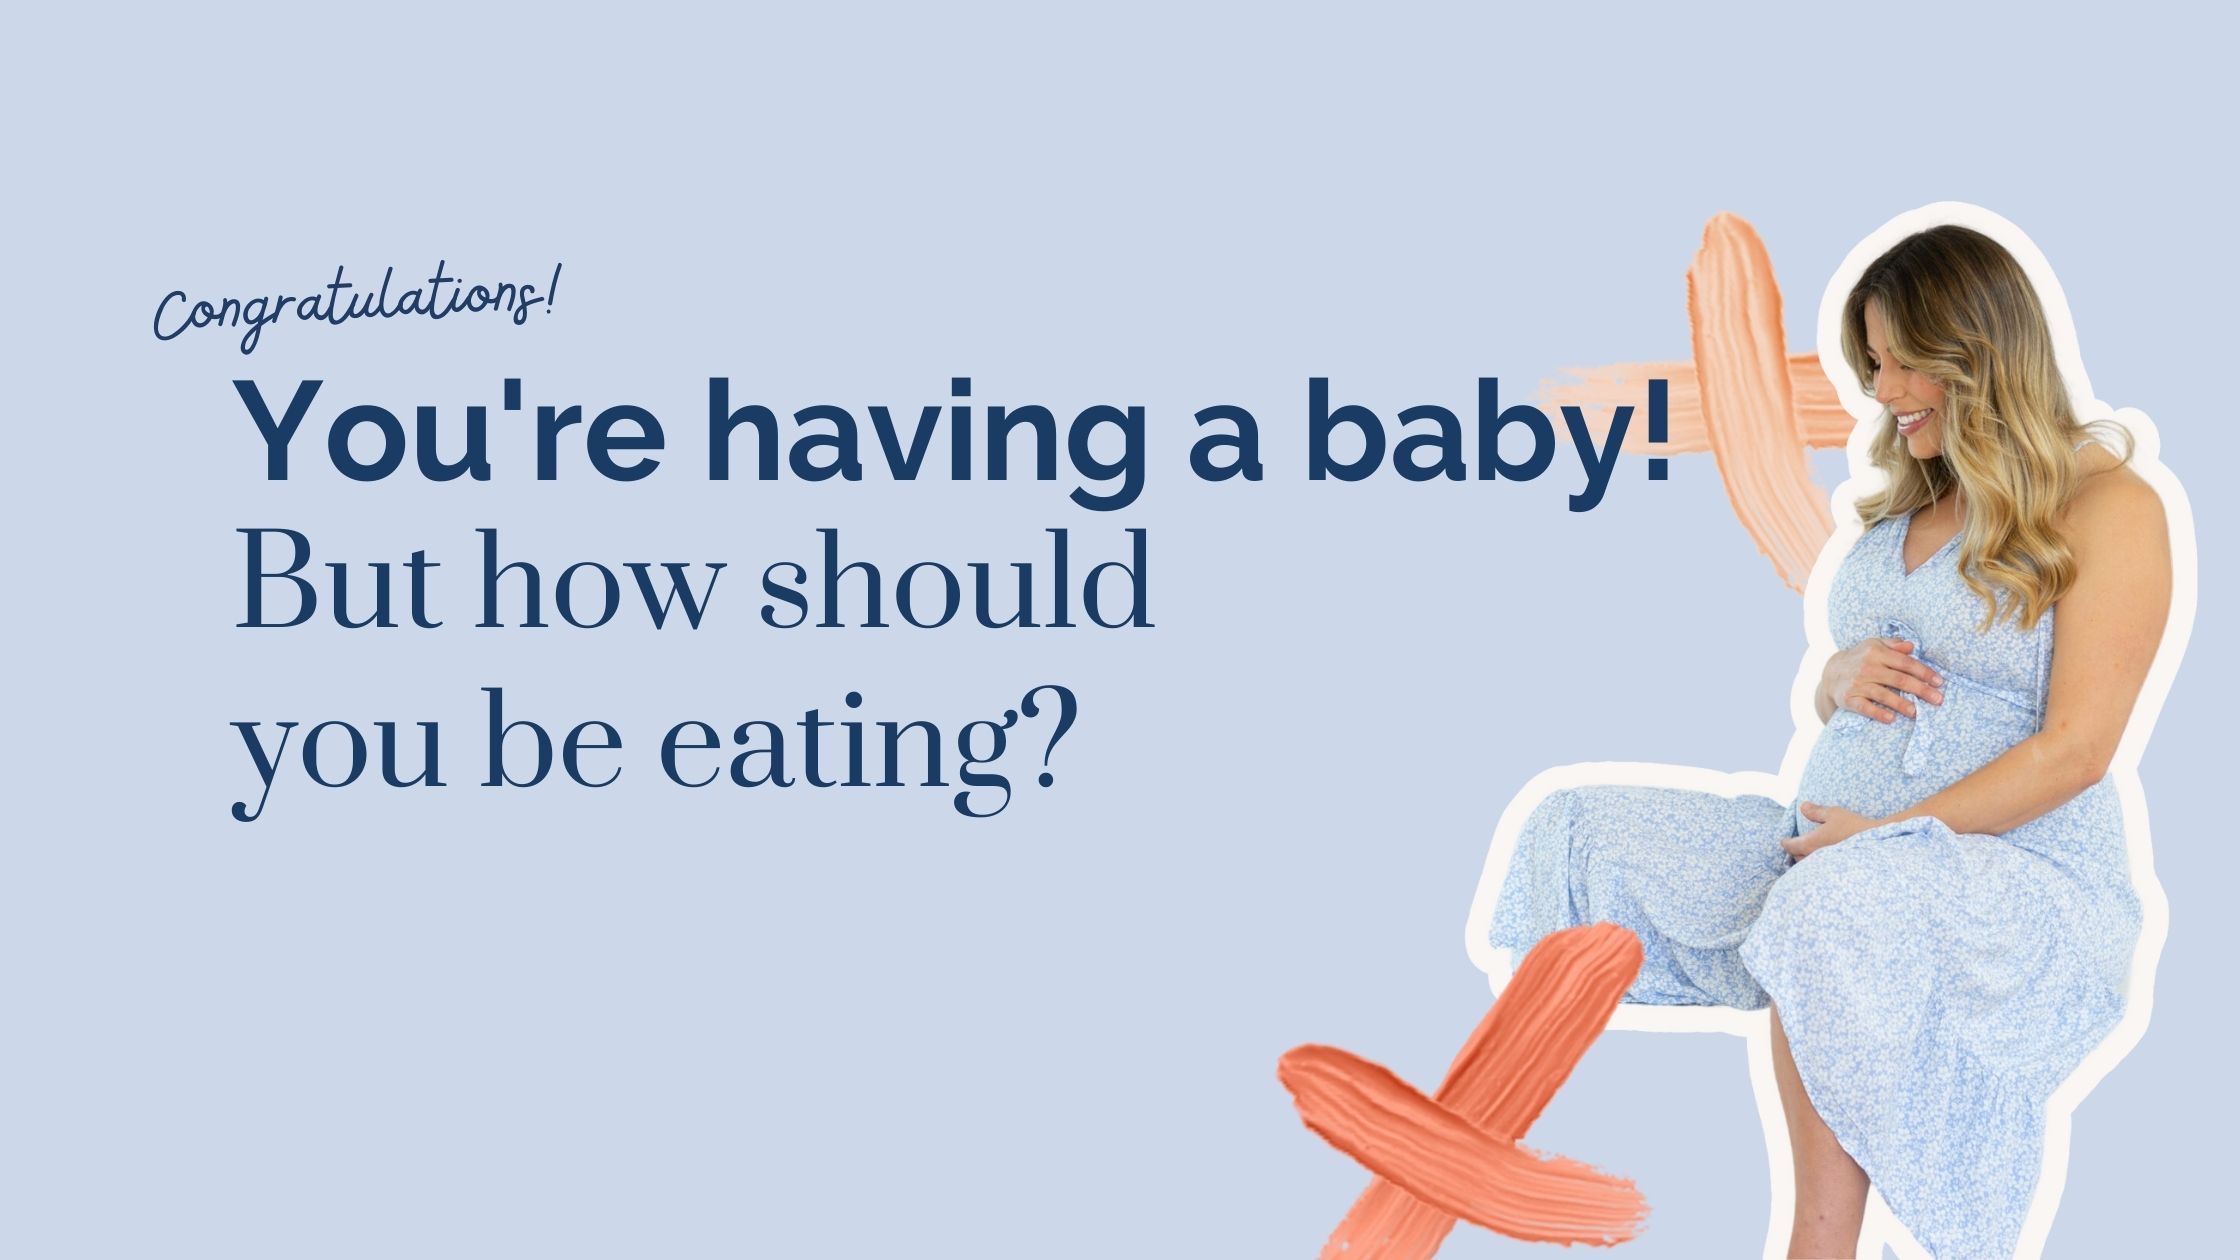 How to eat healthily when you're pregnant